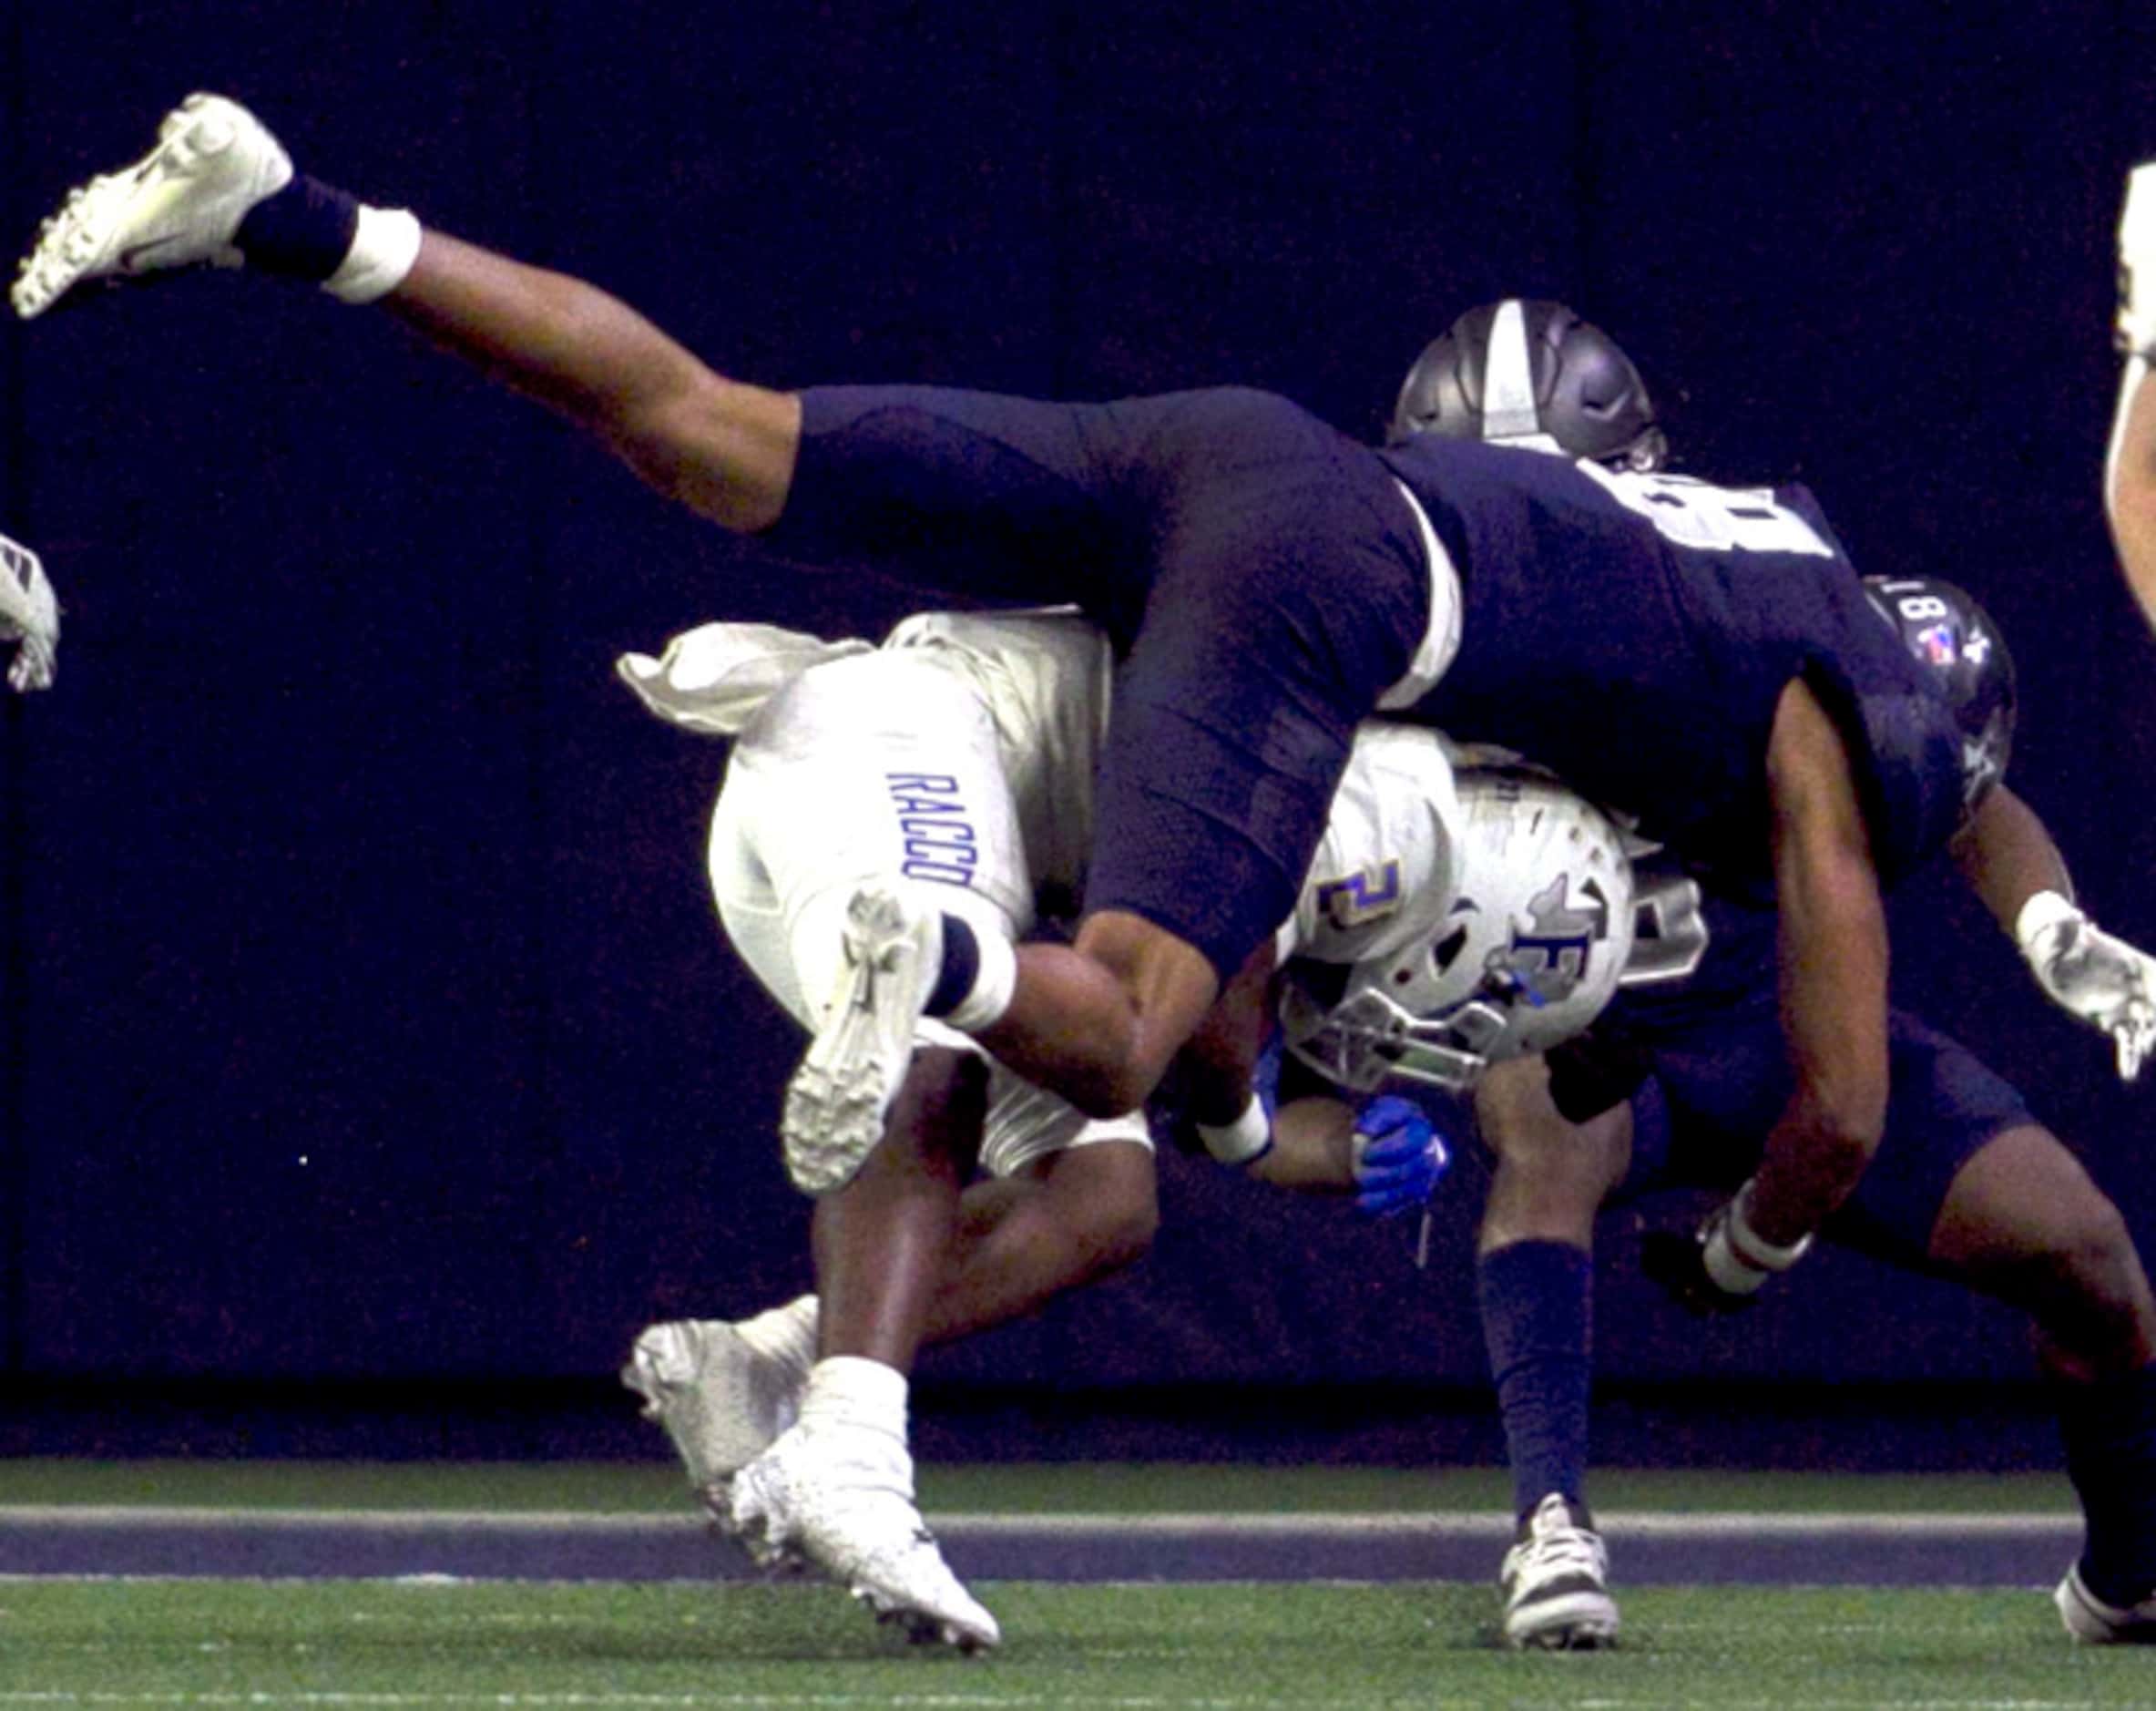 Frisco Lone Star defender Jordan Deck (18) takes a flying leap approach to tackling Frisco...